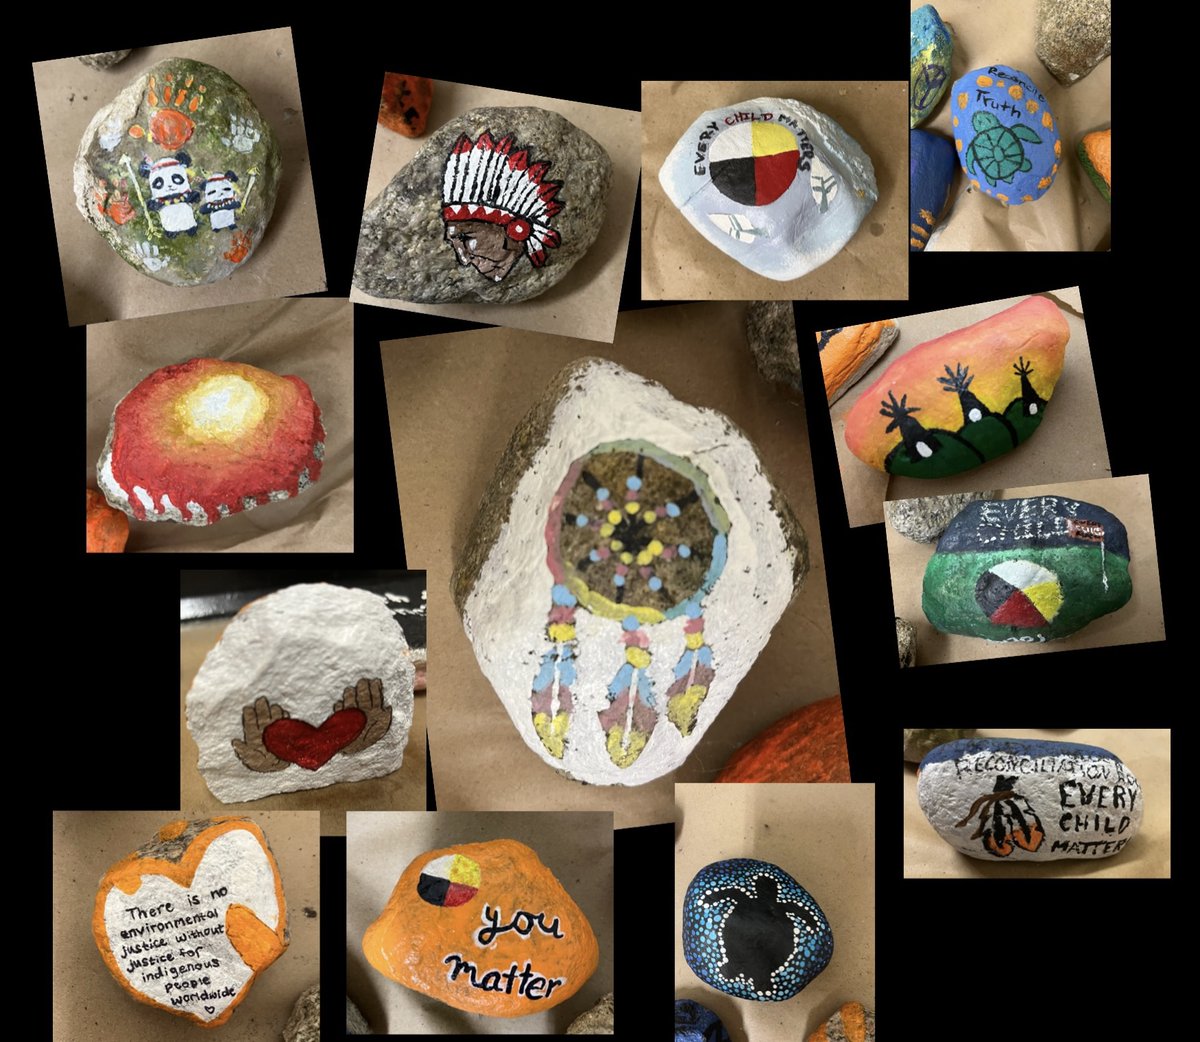 Students and staff took part in the ongoing conversations and learning surrounding Truth and Reconciliation. Students created Reconciliation Rocks that were placed around the school community to inspire others to learn more about Truth and Reconciliation. #everychildmatters